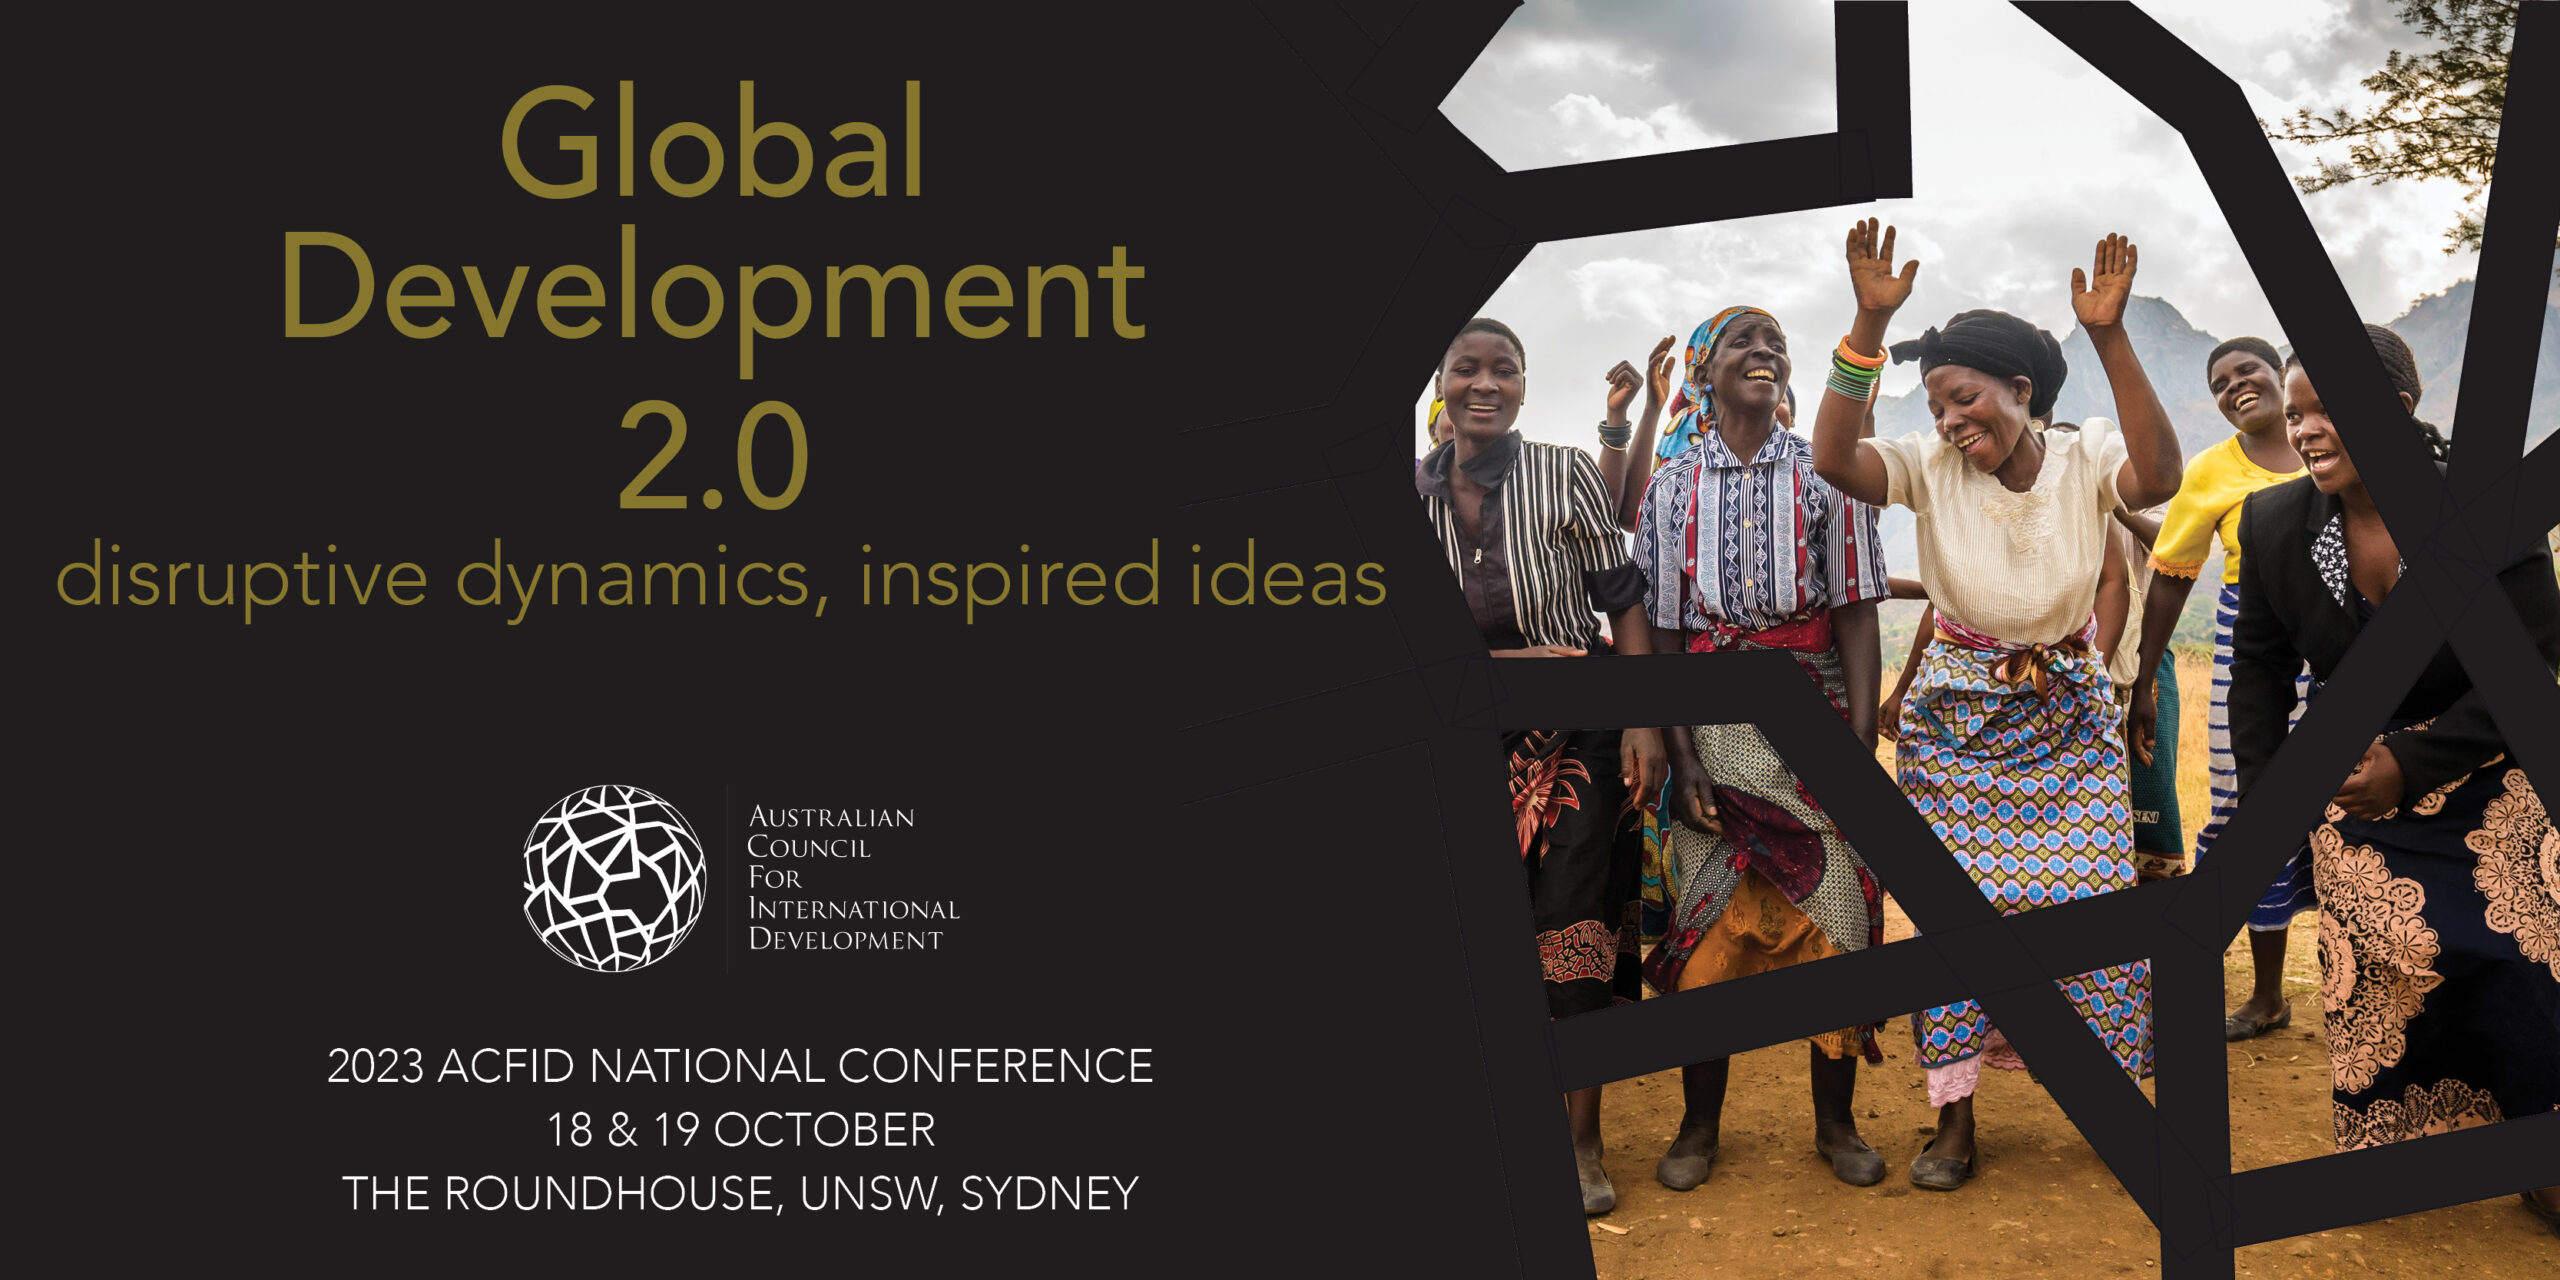 Global Development 2.0: disruptive dynamics, inspired ideas</p>
<p>ACFID National Conference 2023. Contains a picture from World Vision of women joyously dancing inside ACFID's webbing in the shape of Australia